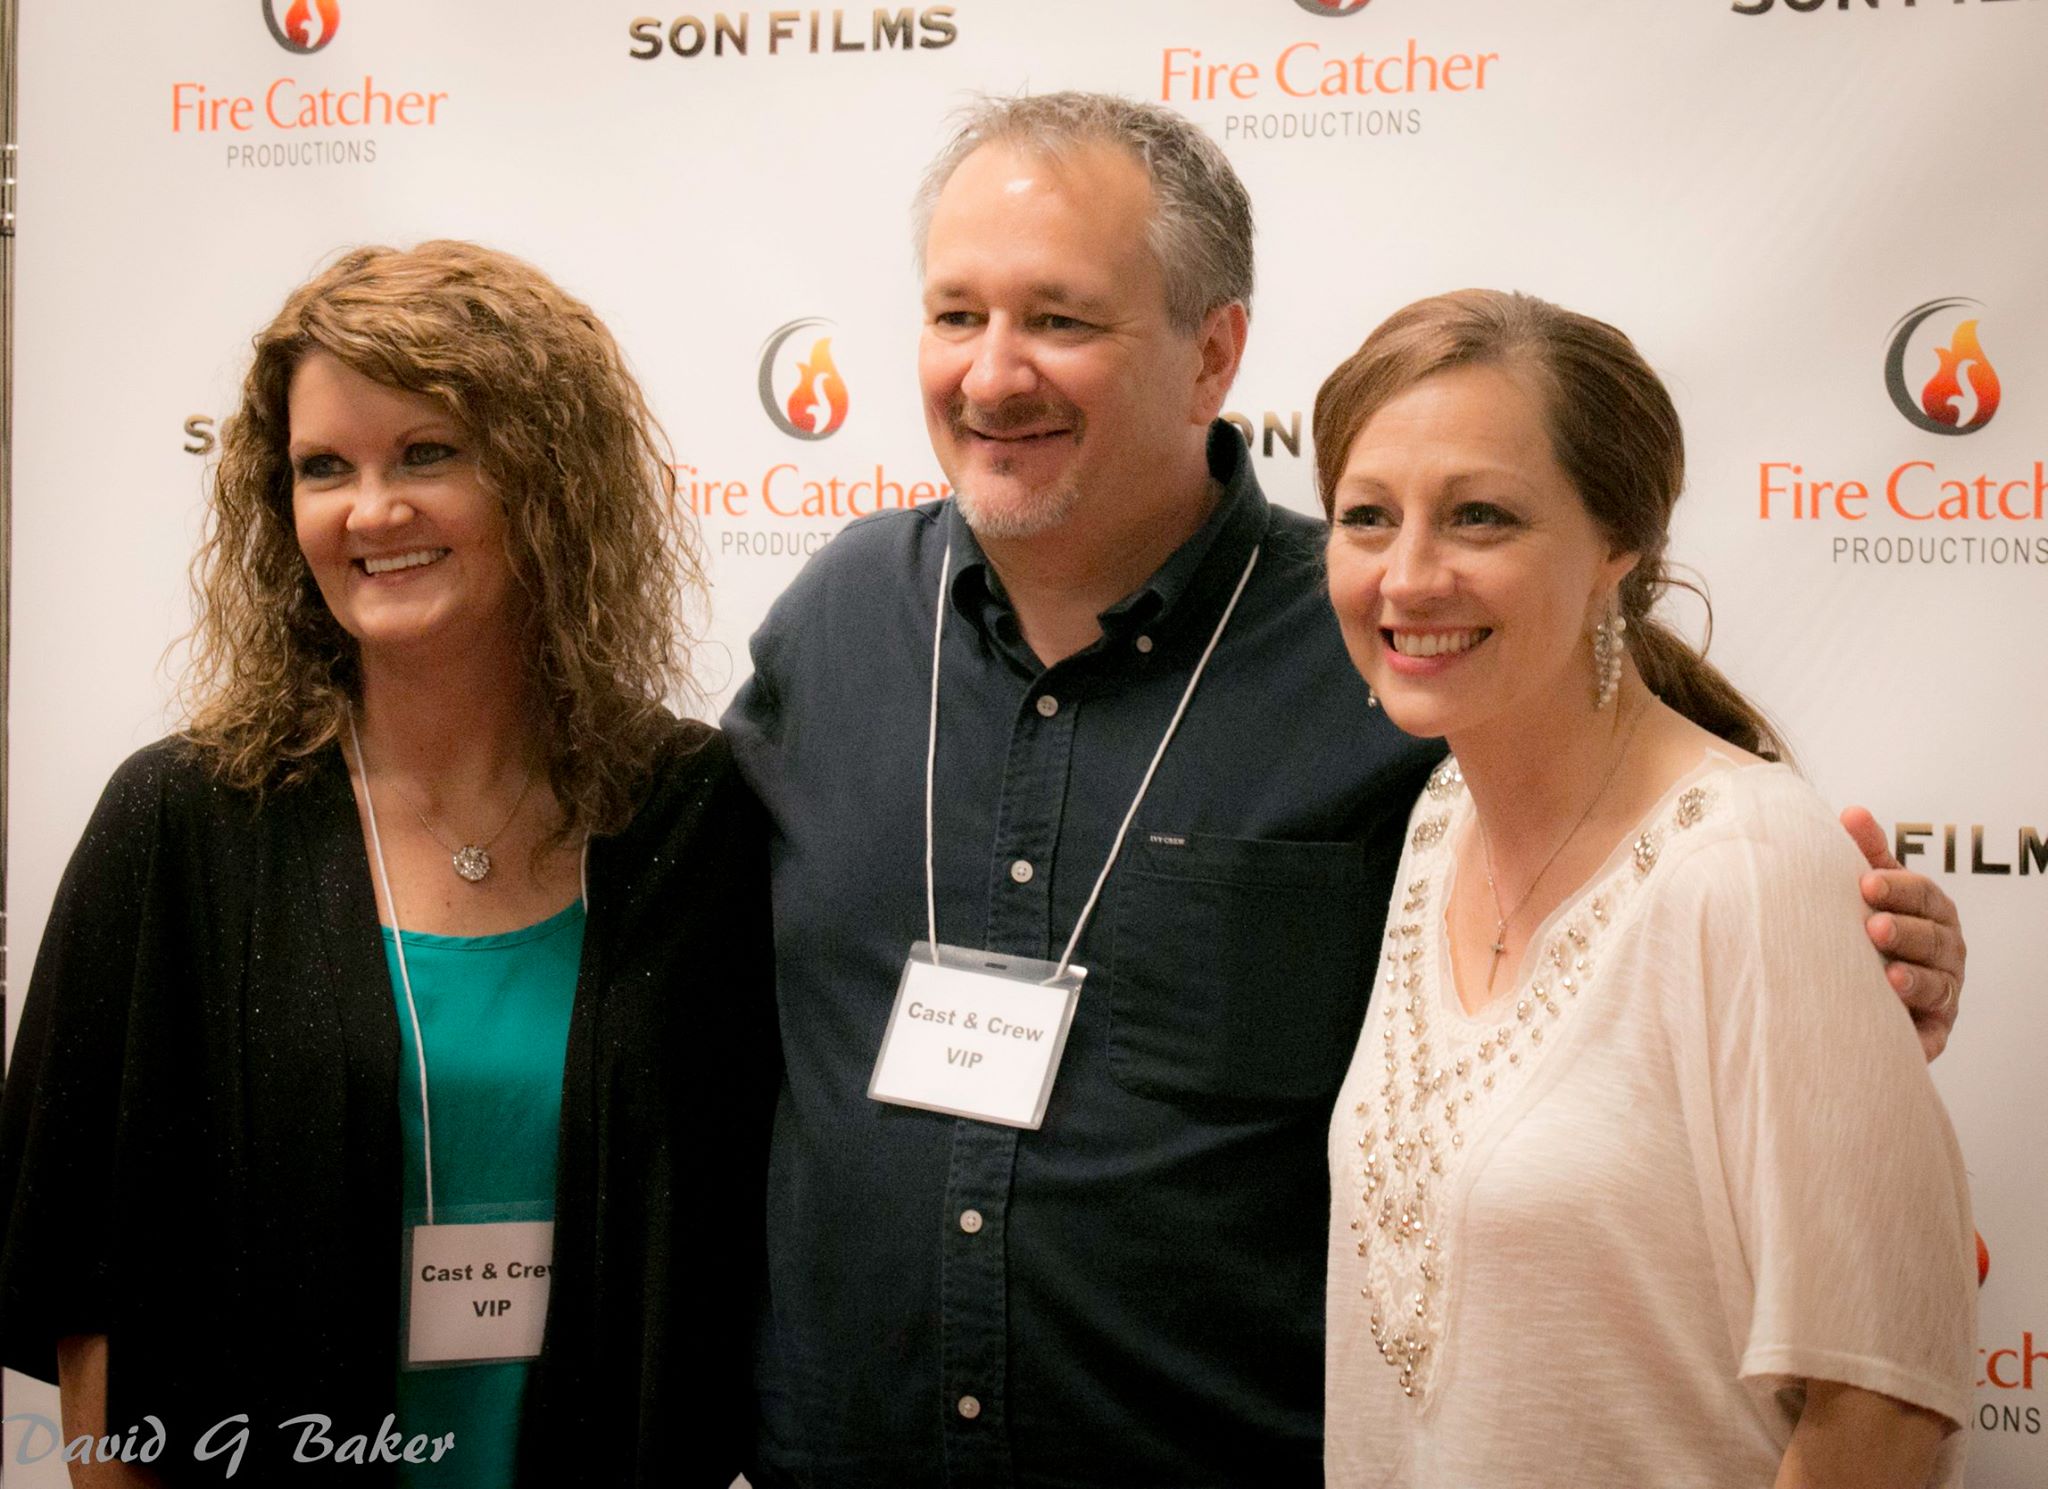 Kimberly J. Richardson with actor Ken Dohse and actress Juli Tapken at the Fire on the Track Concert for the film The Reins Maker. 2015